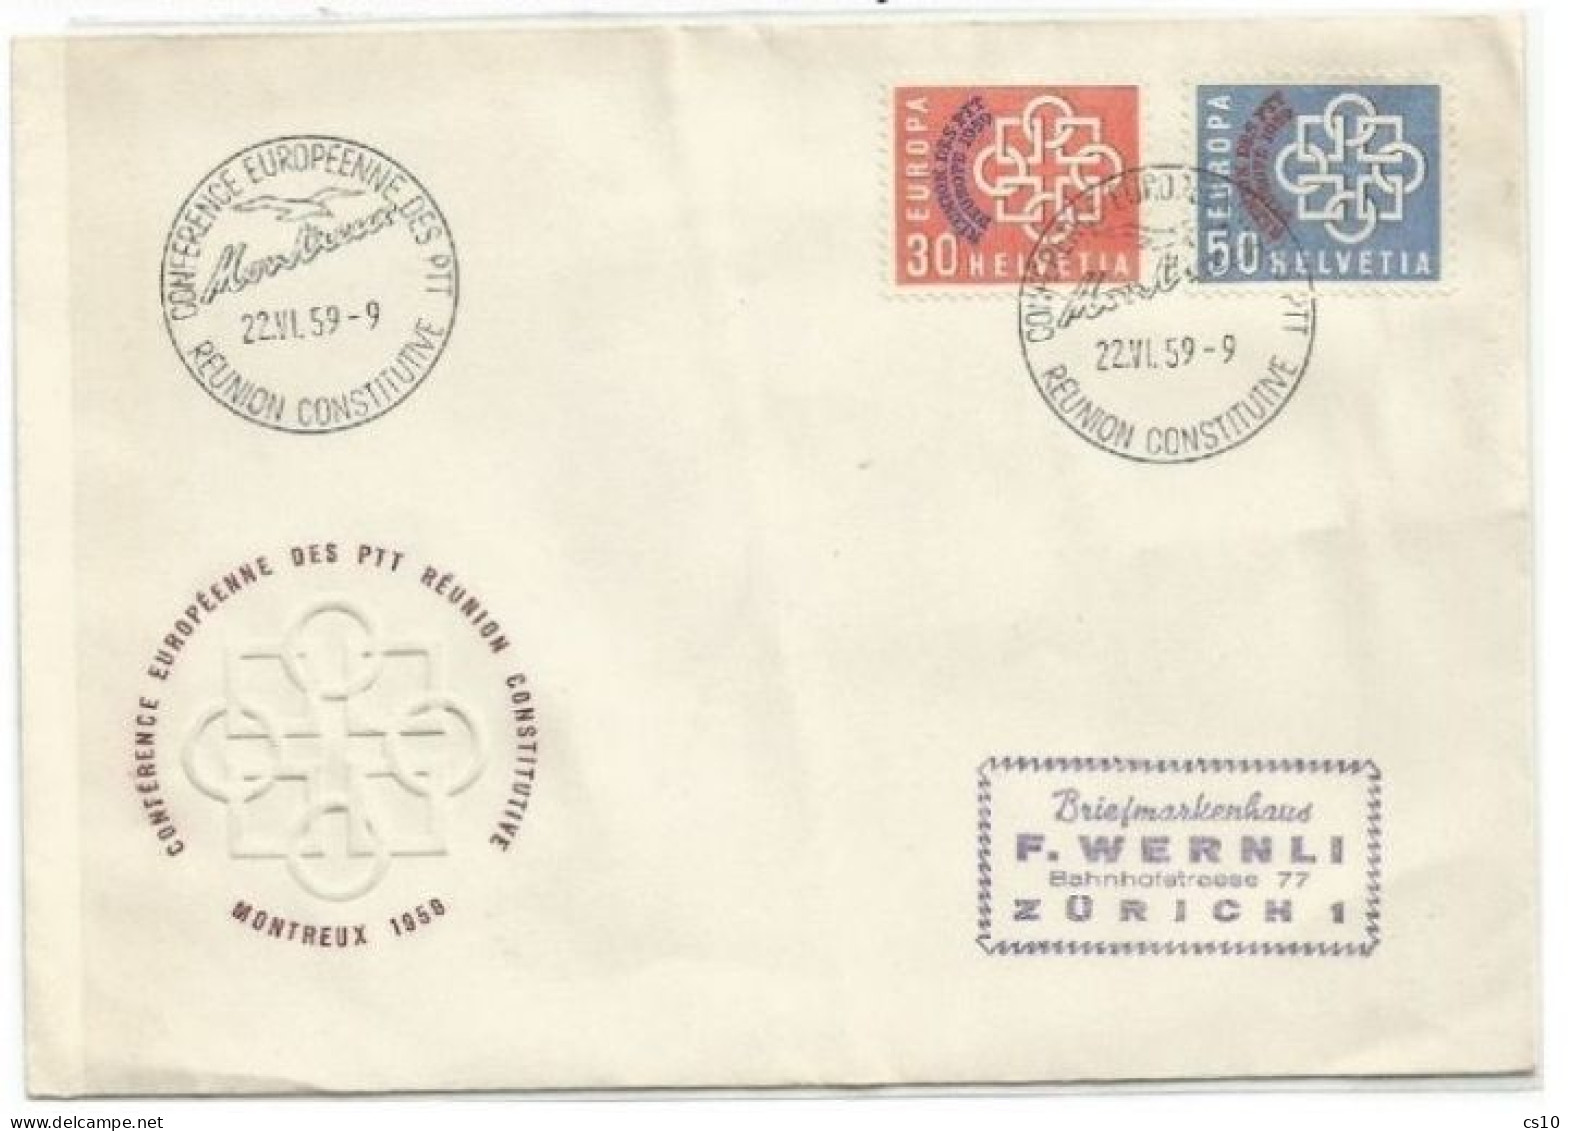 Suisse 1959 Conference Ministeres PPTT - Europa CEPT Issue OVPT - FDC - 1959